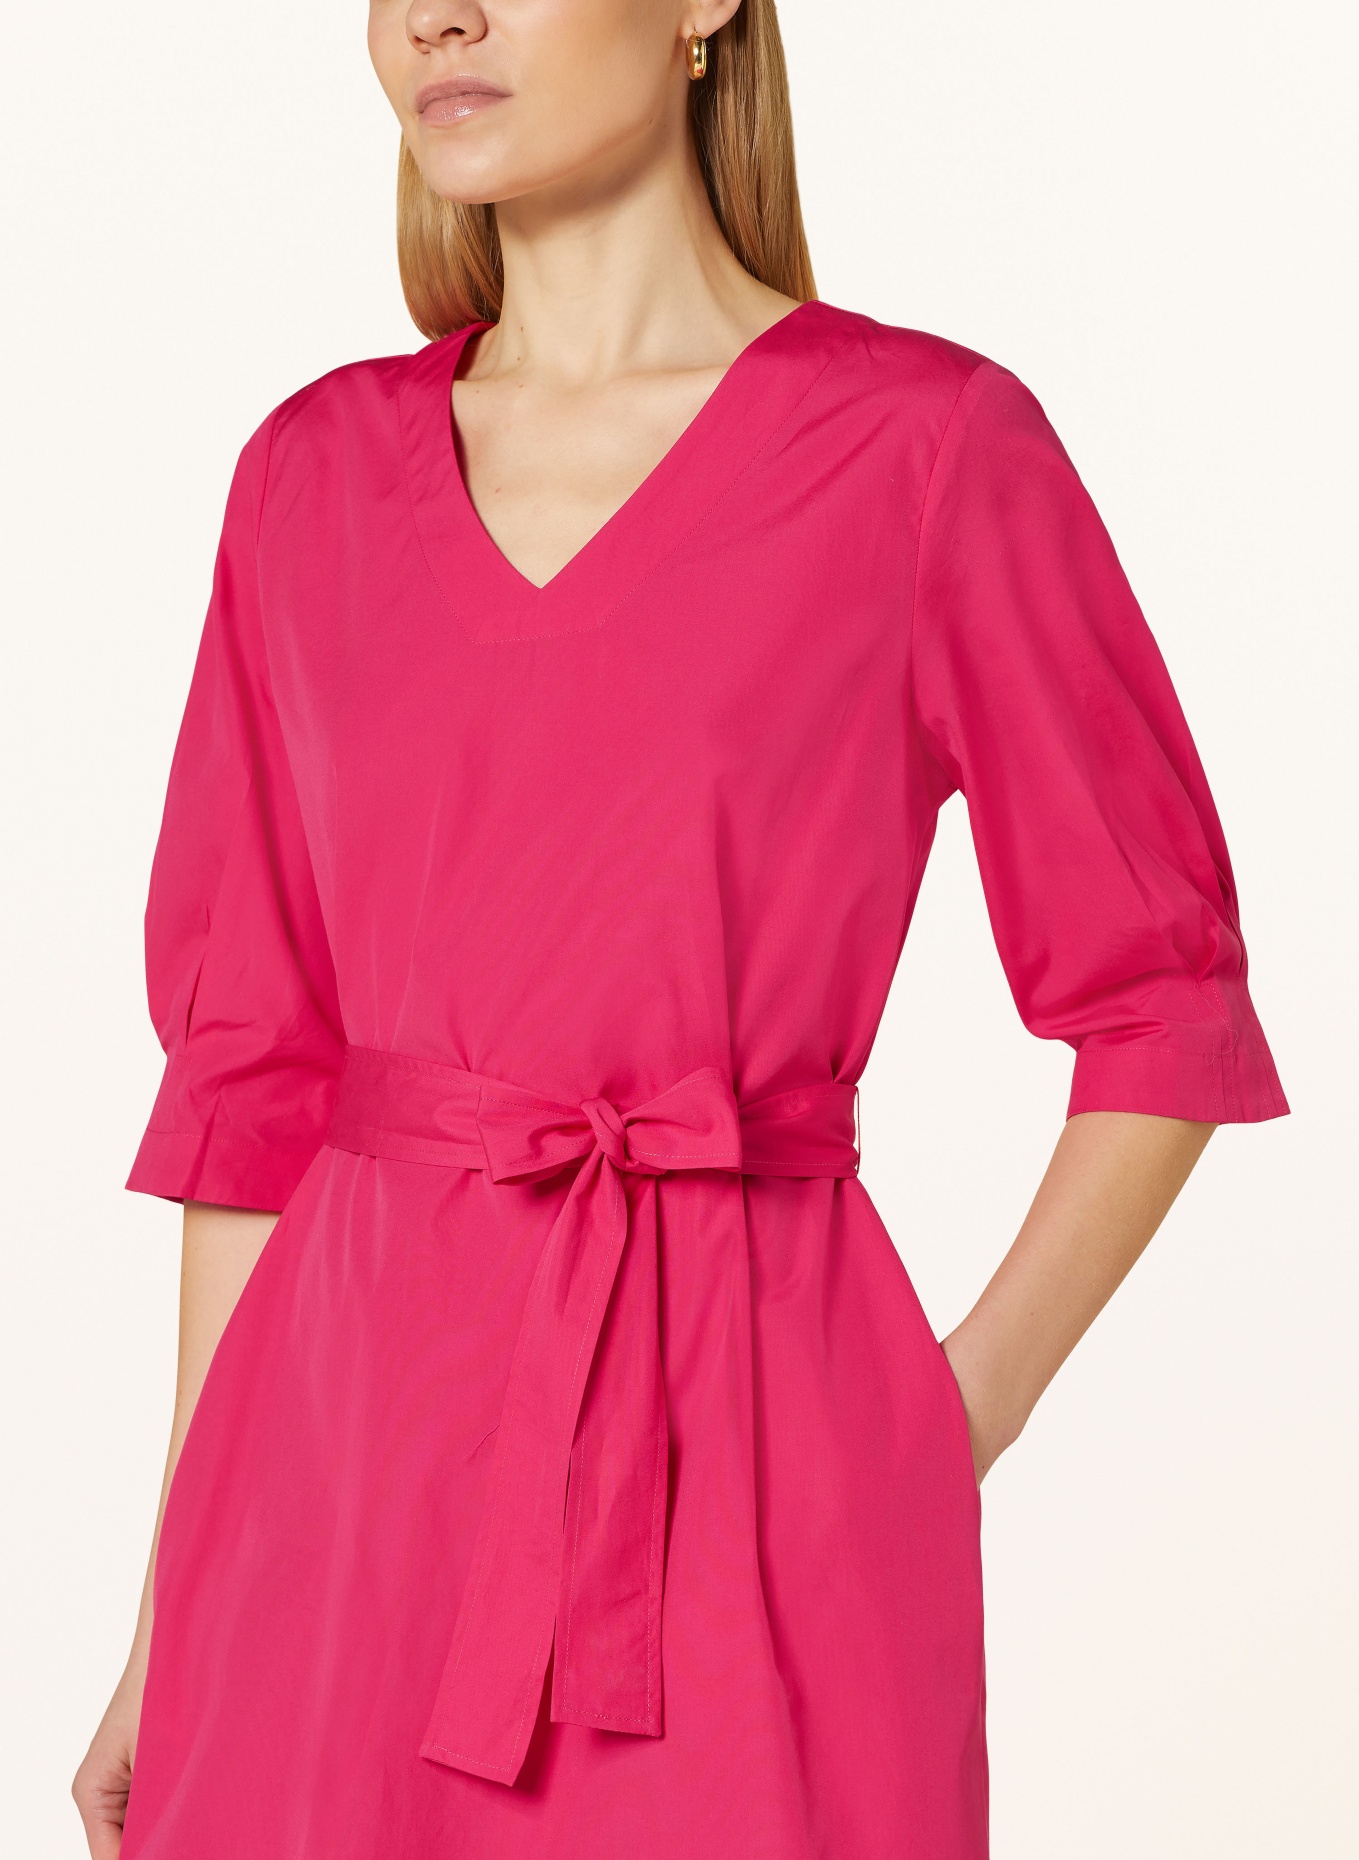 MAERZ MUENCHEN Dress with 3/4 sleeves, Color: PINK (Image 4)